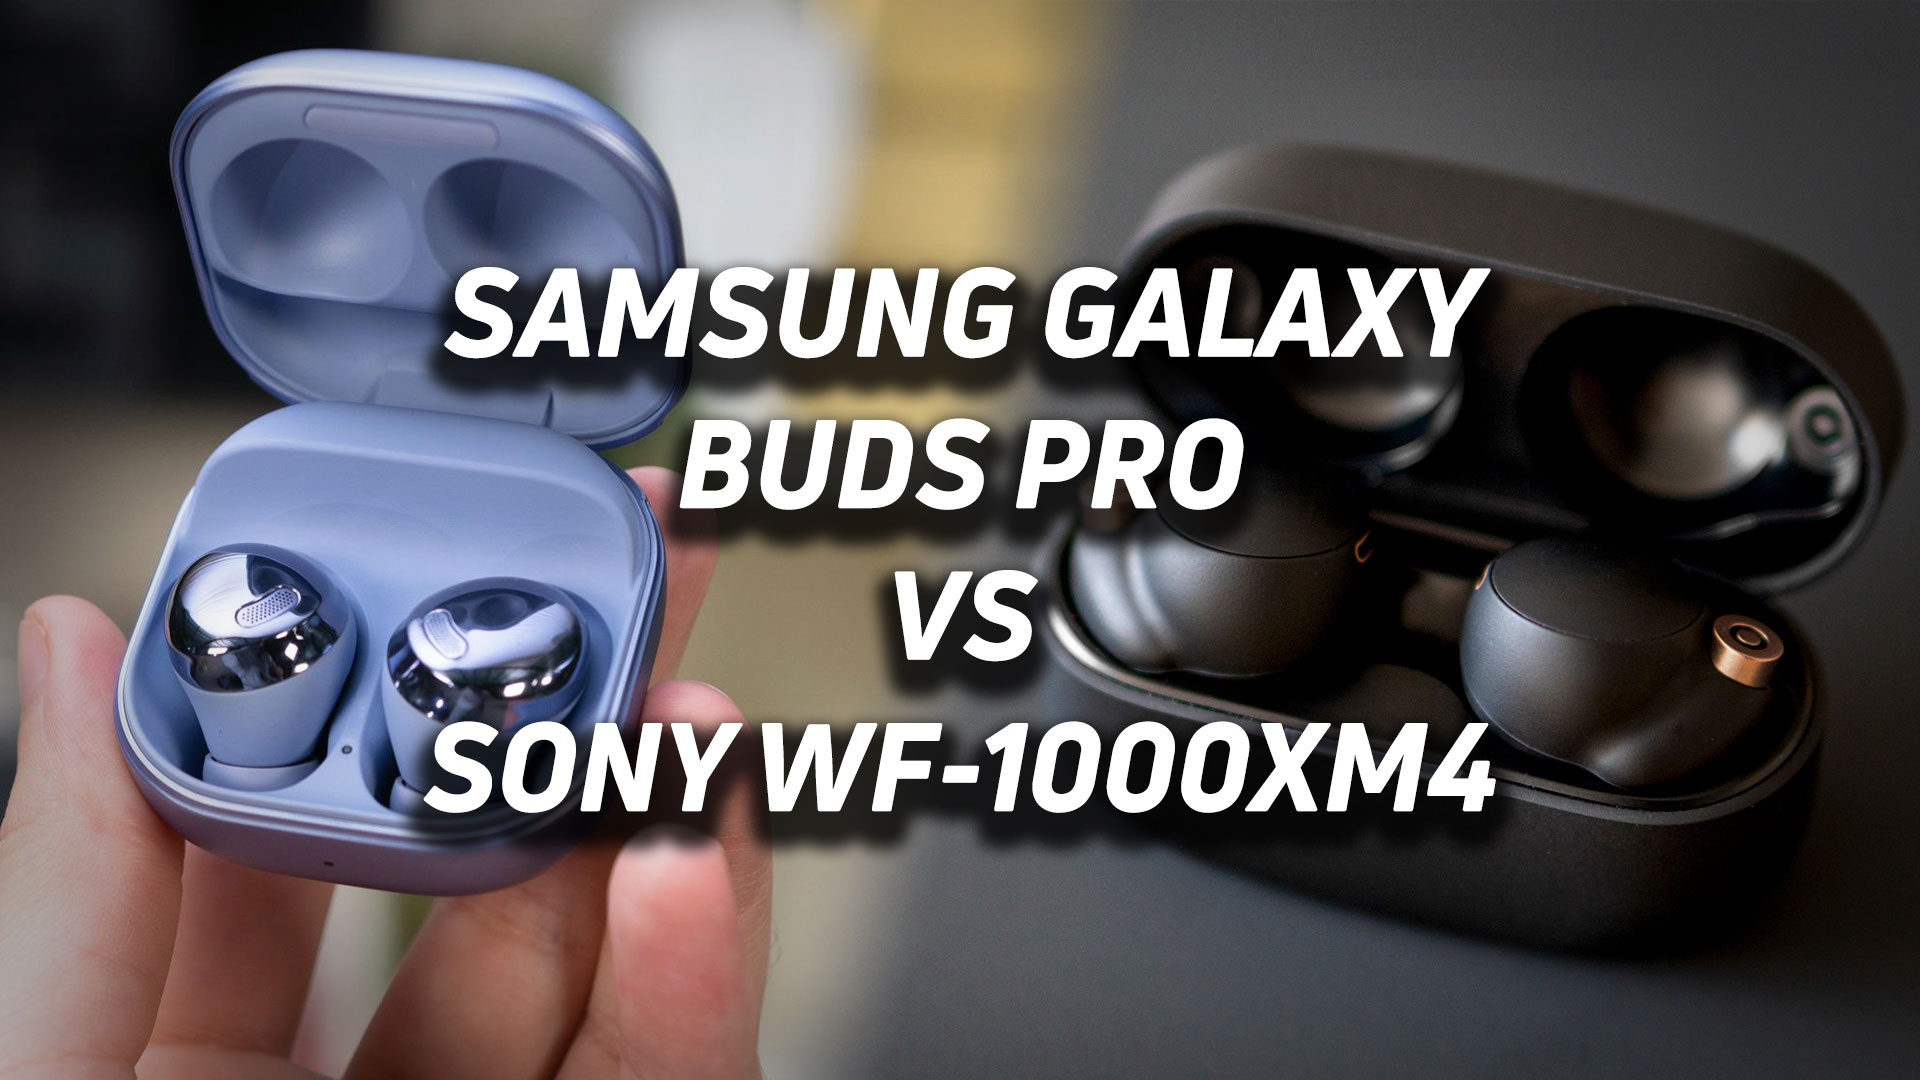 A blended image of the Samsung Galaxy Buds Pro